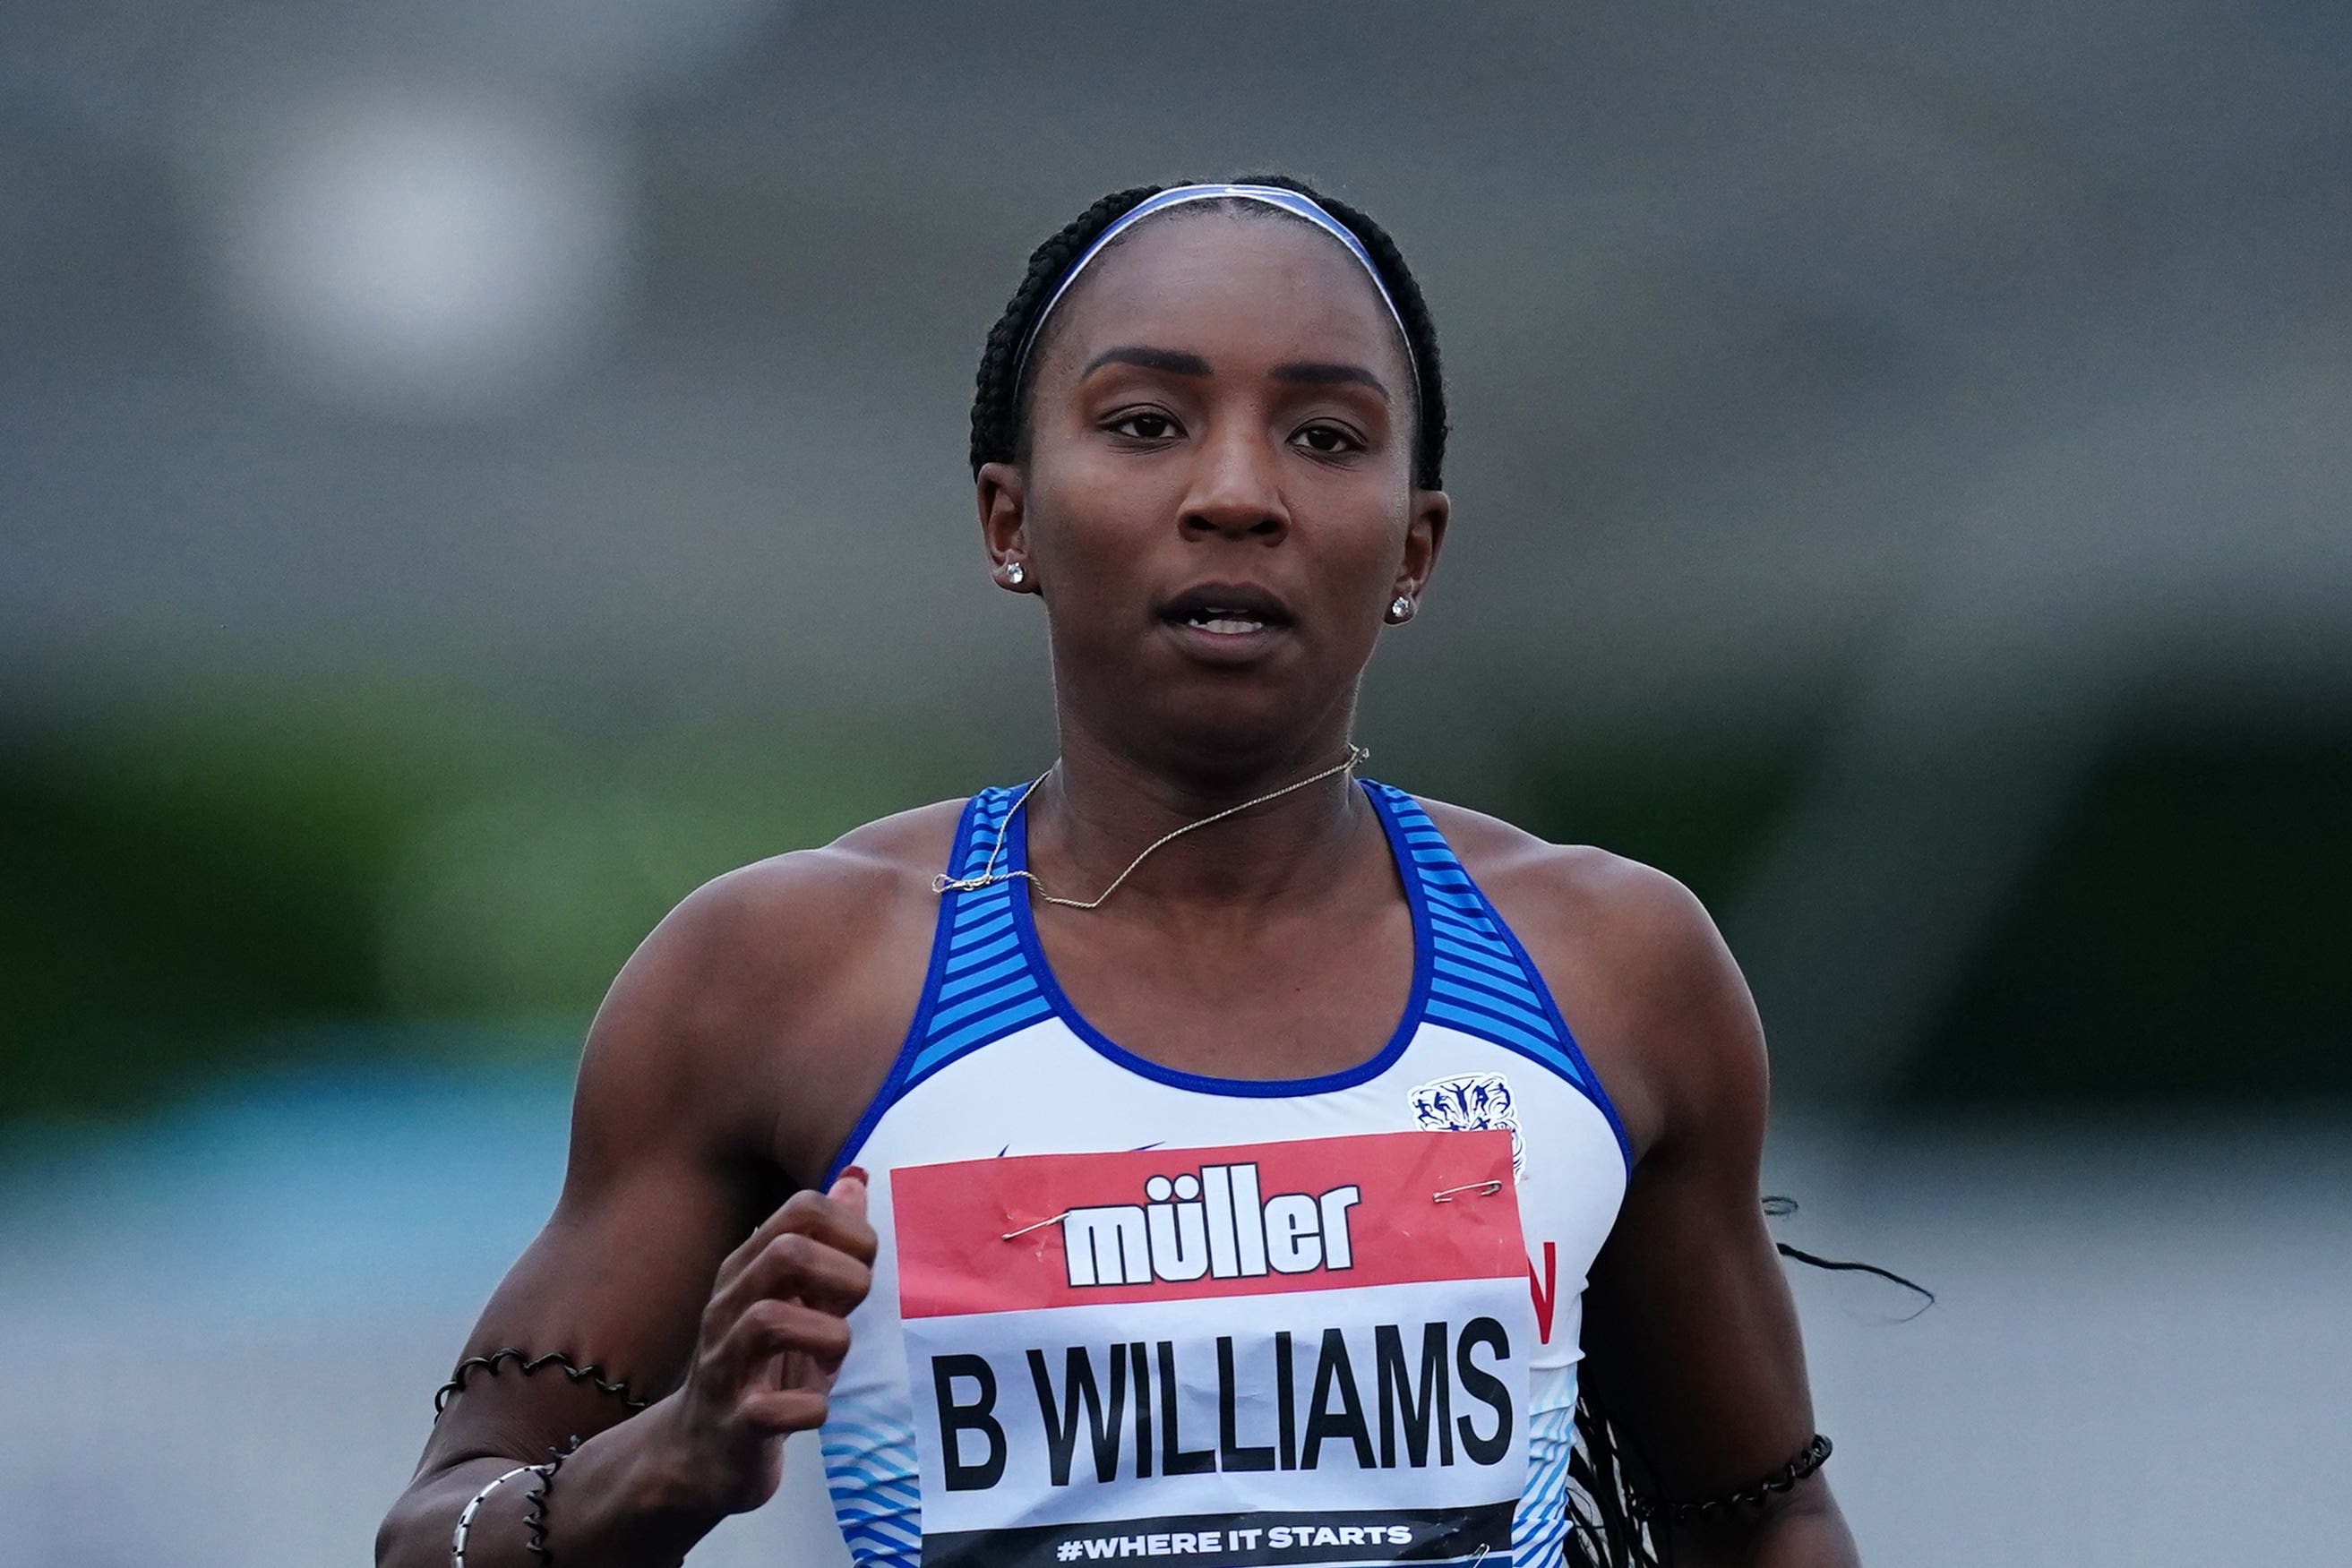 Ms Williams has won bronze in the 4x100m at the World Athletics Championships